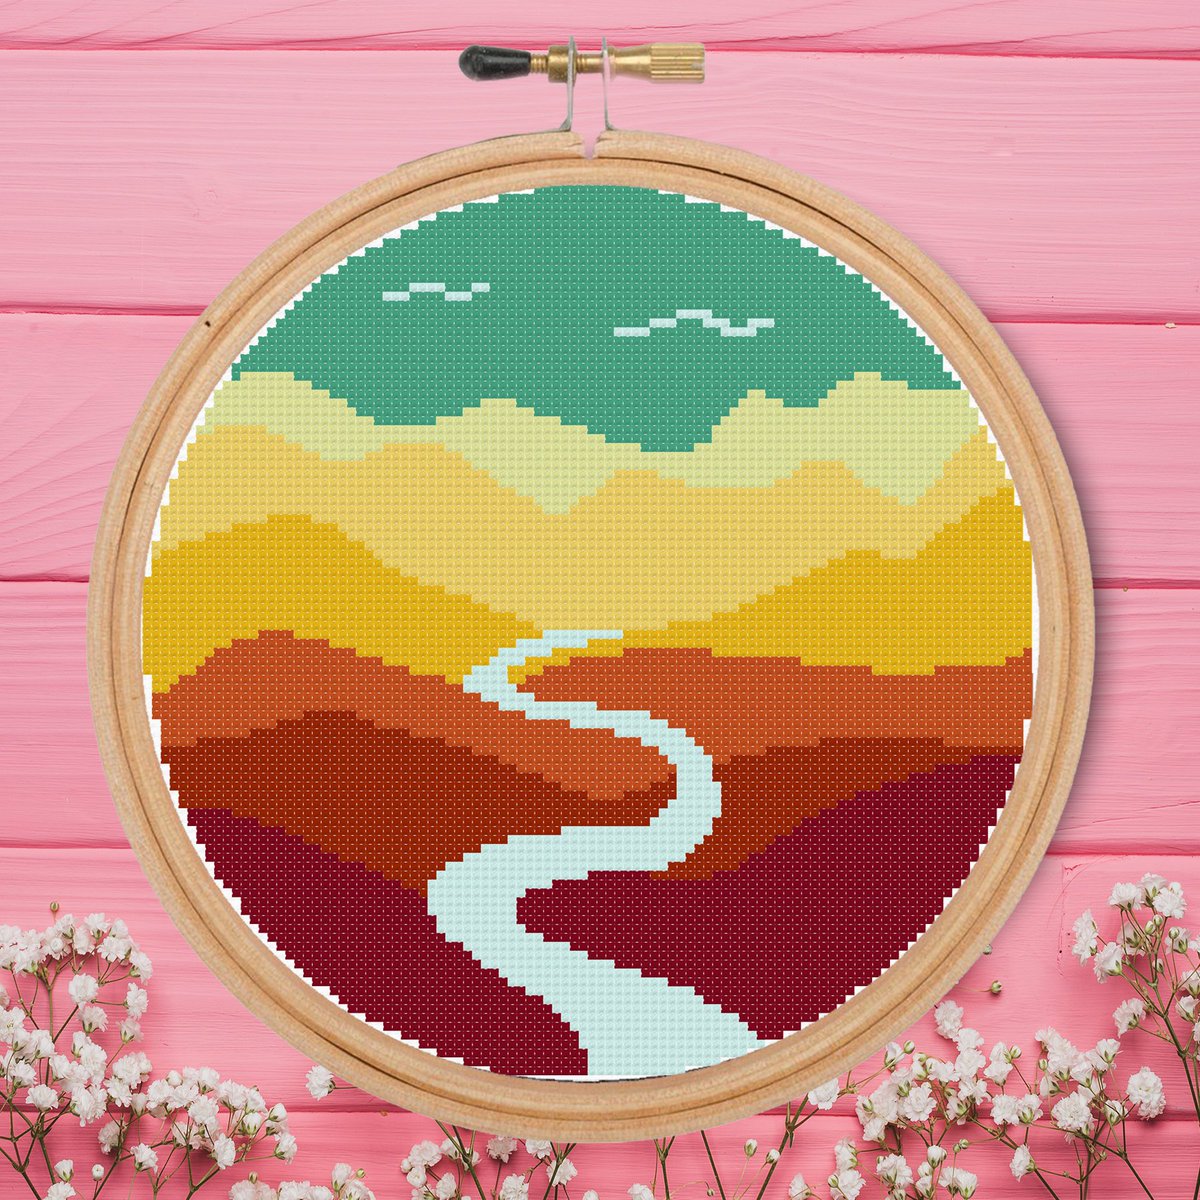 Mini Desert Landscape Cross Stitch Pattern PDF for beginners birds sky cactus mountains moon National park nature small DIY gift